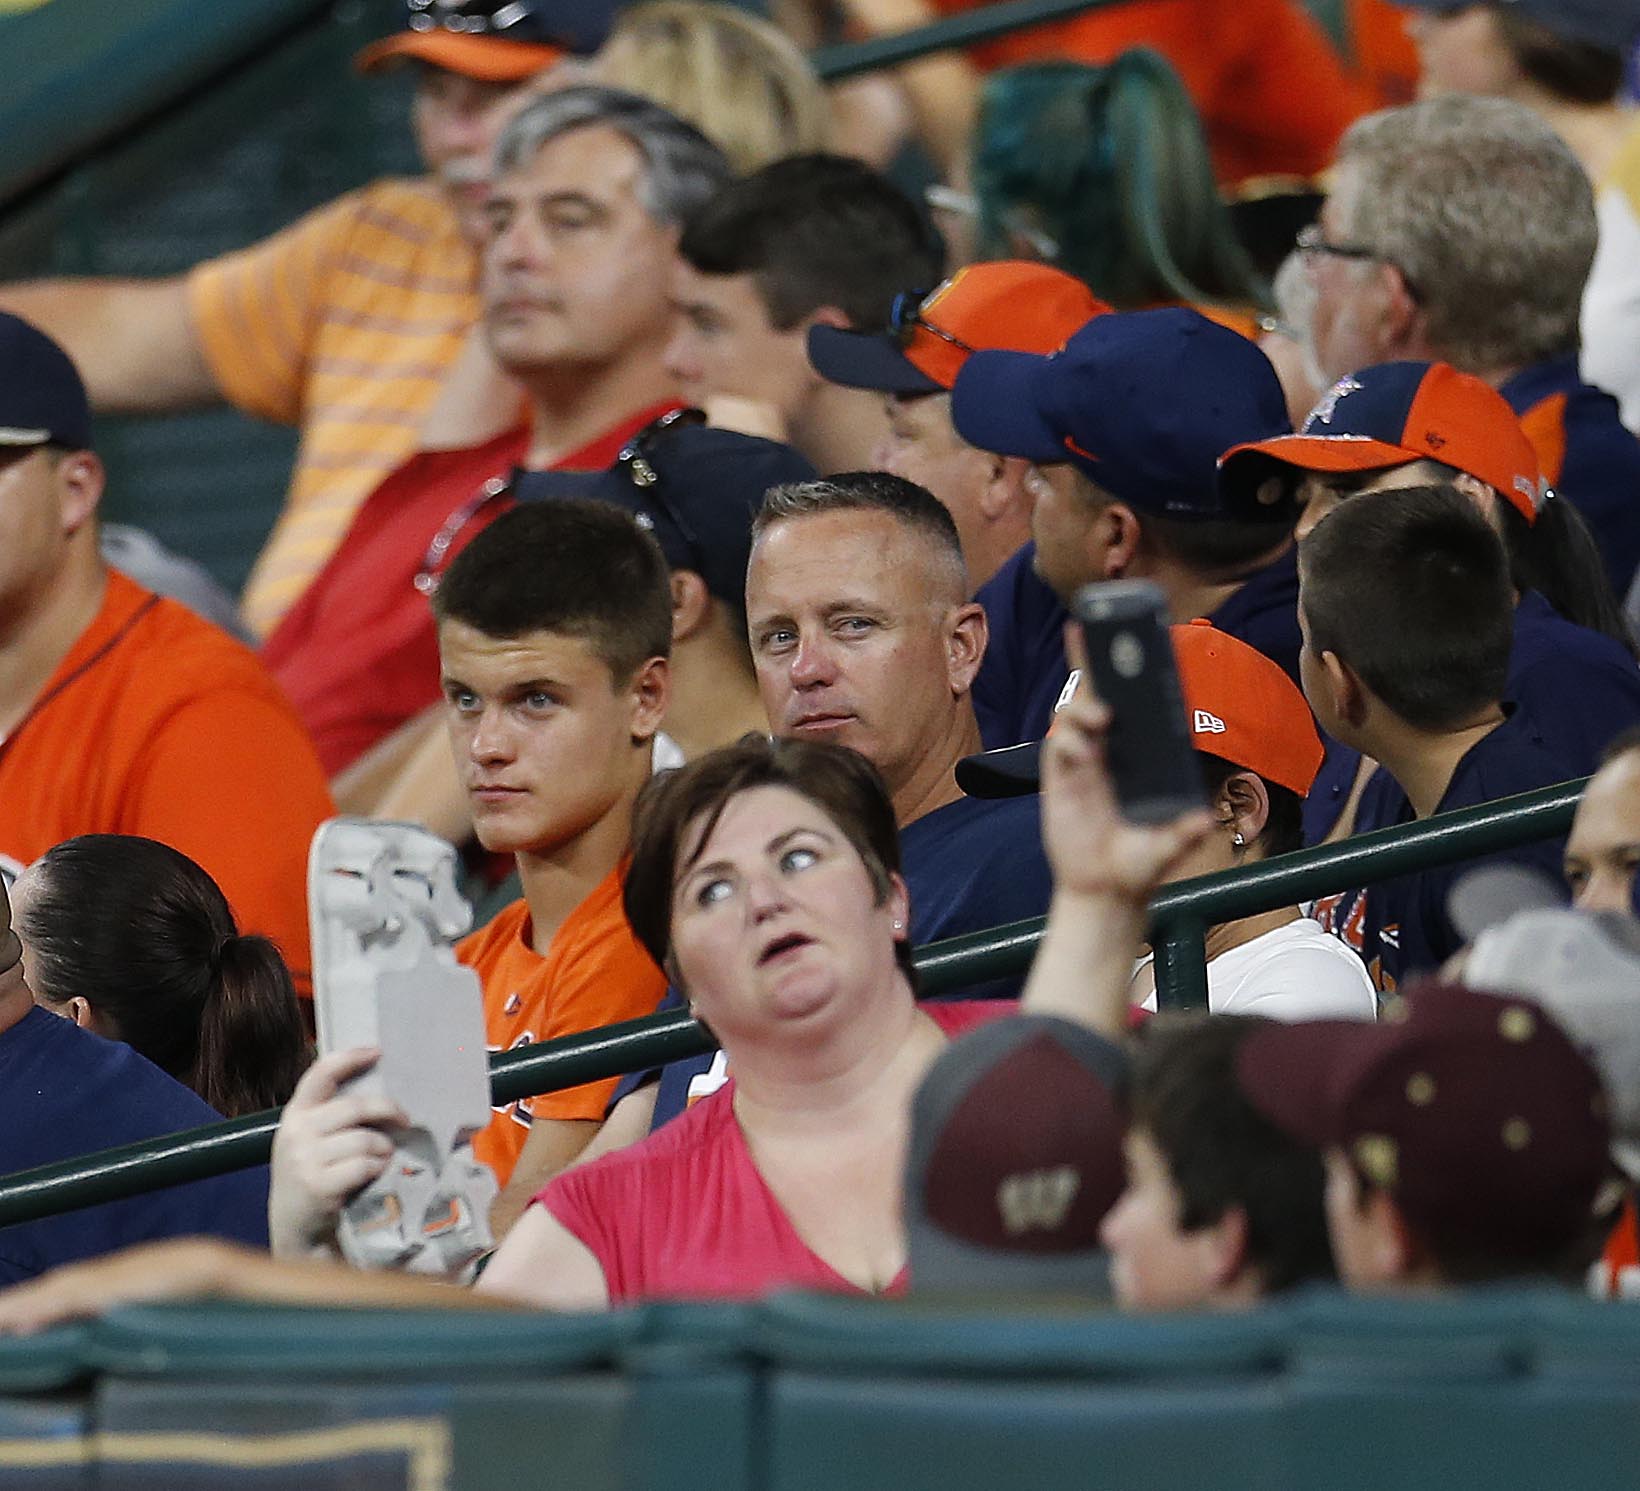 Houston Astros to stay at Minute Maid Park until 2050 - SportsPro